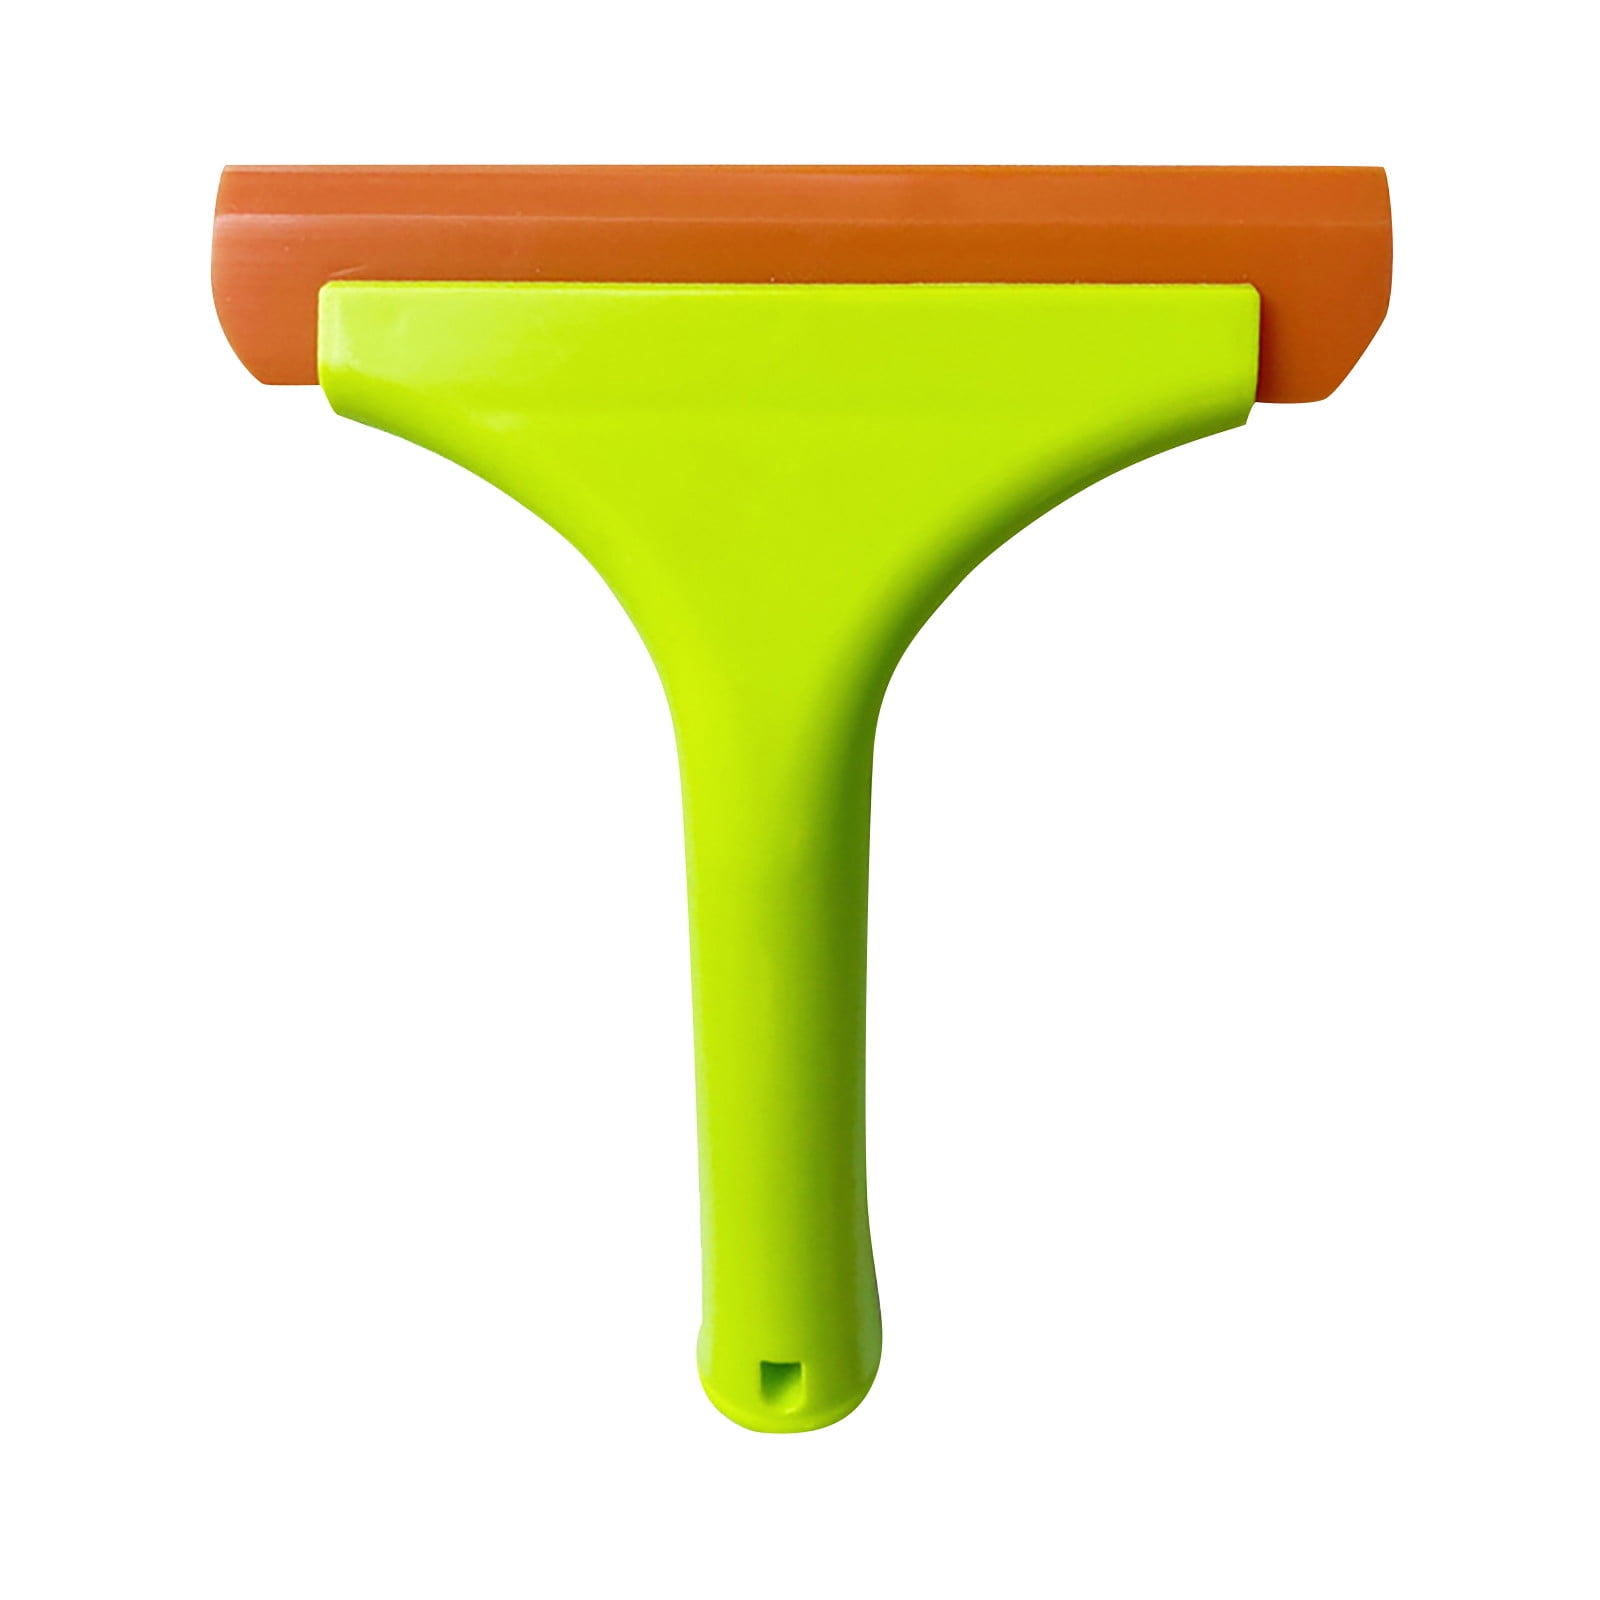 RICHMIRTH Silicone Rubber Blade Shower Squeegee 9 in Width Window